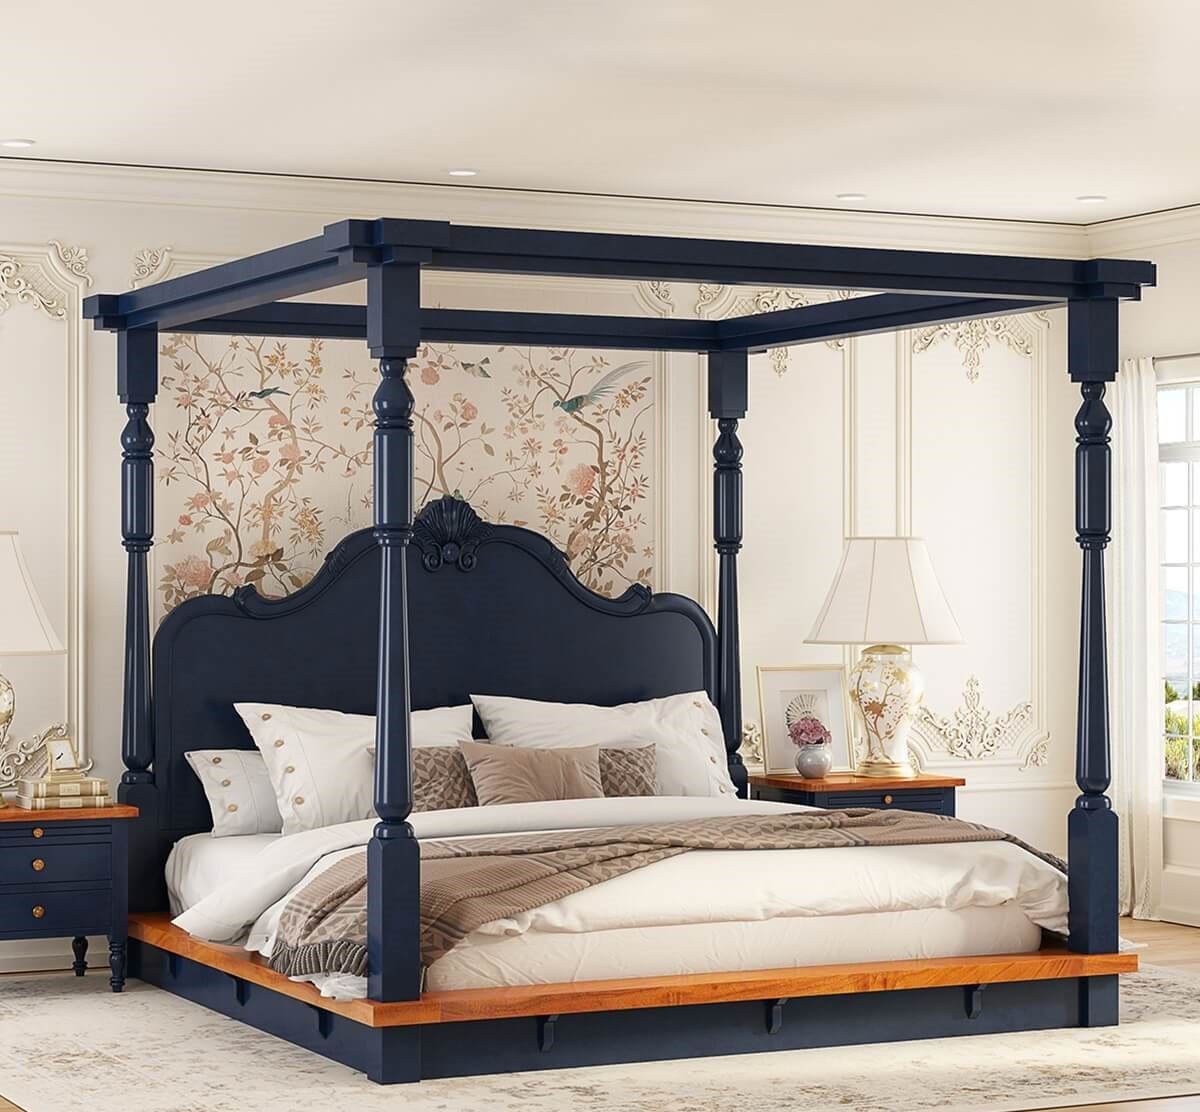 Handmade Two Tone Solid Wood Bed | Hand Carved Canopy Bed with Carved Headboard Beds & Bed Frames - Bone Inlay Furnitures